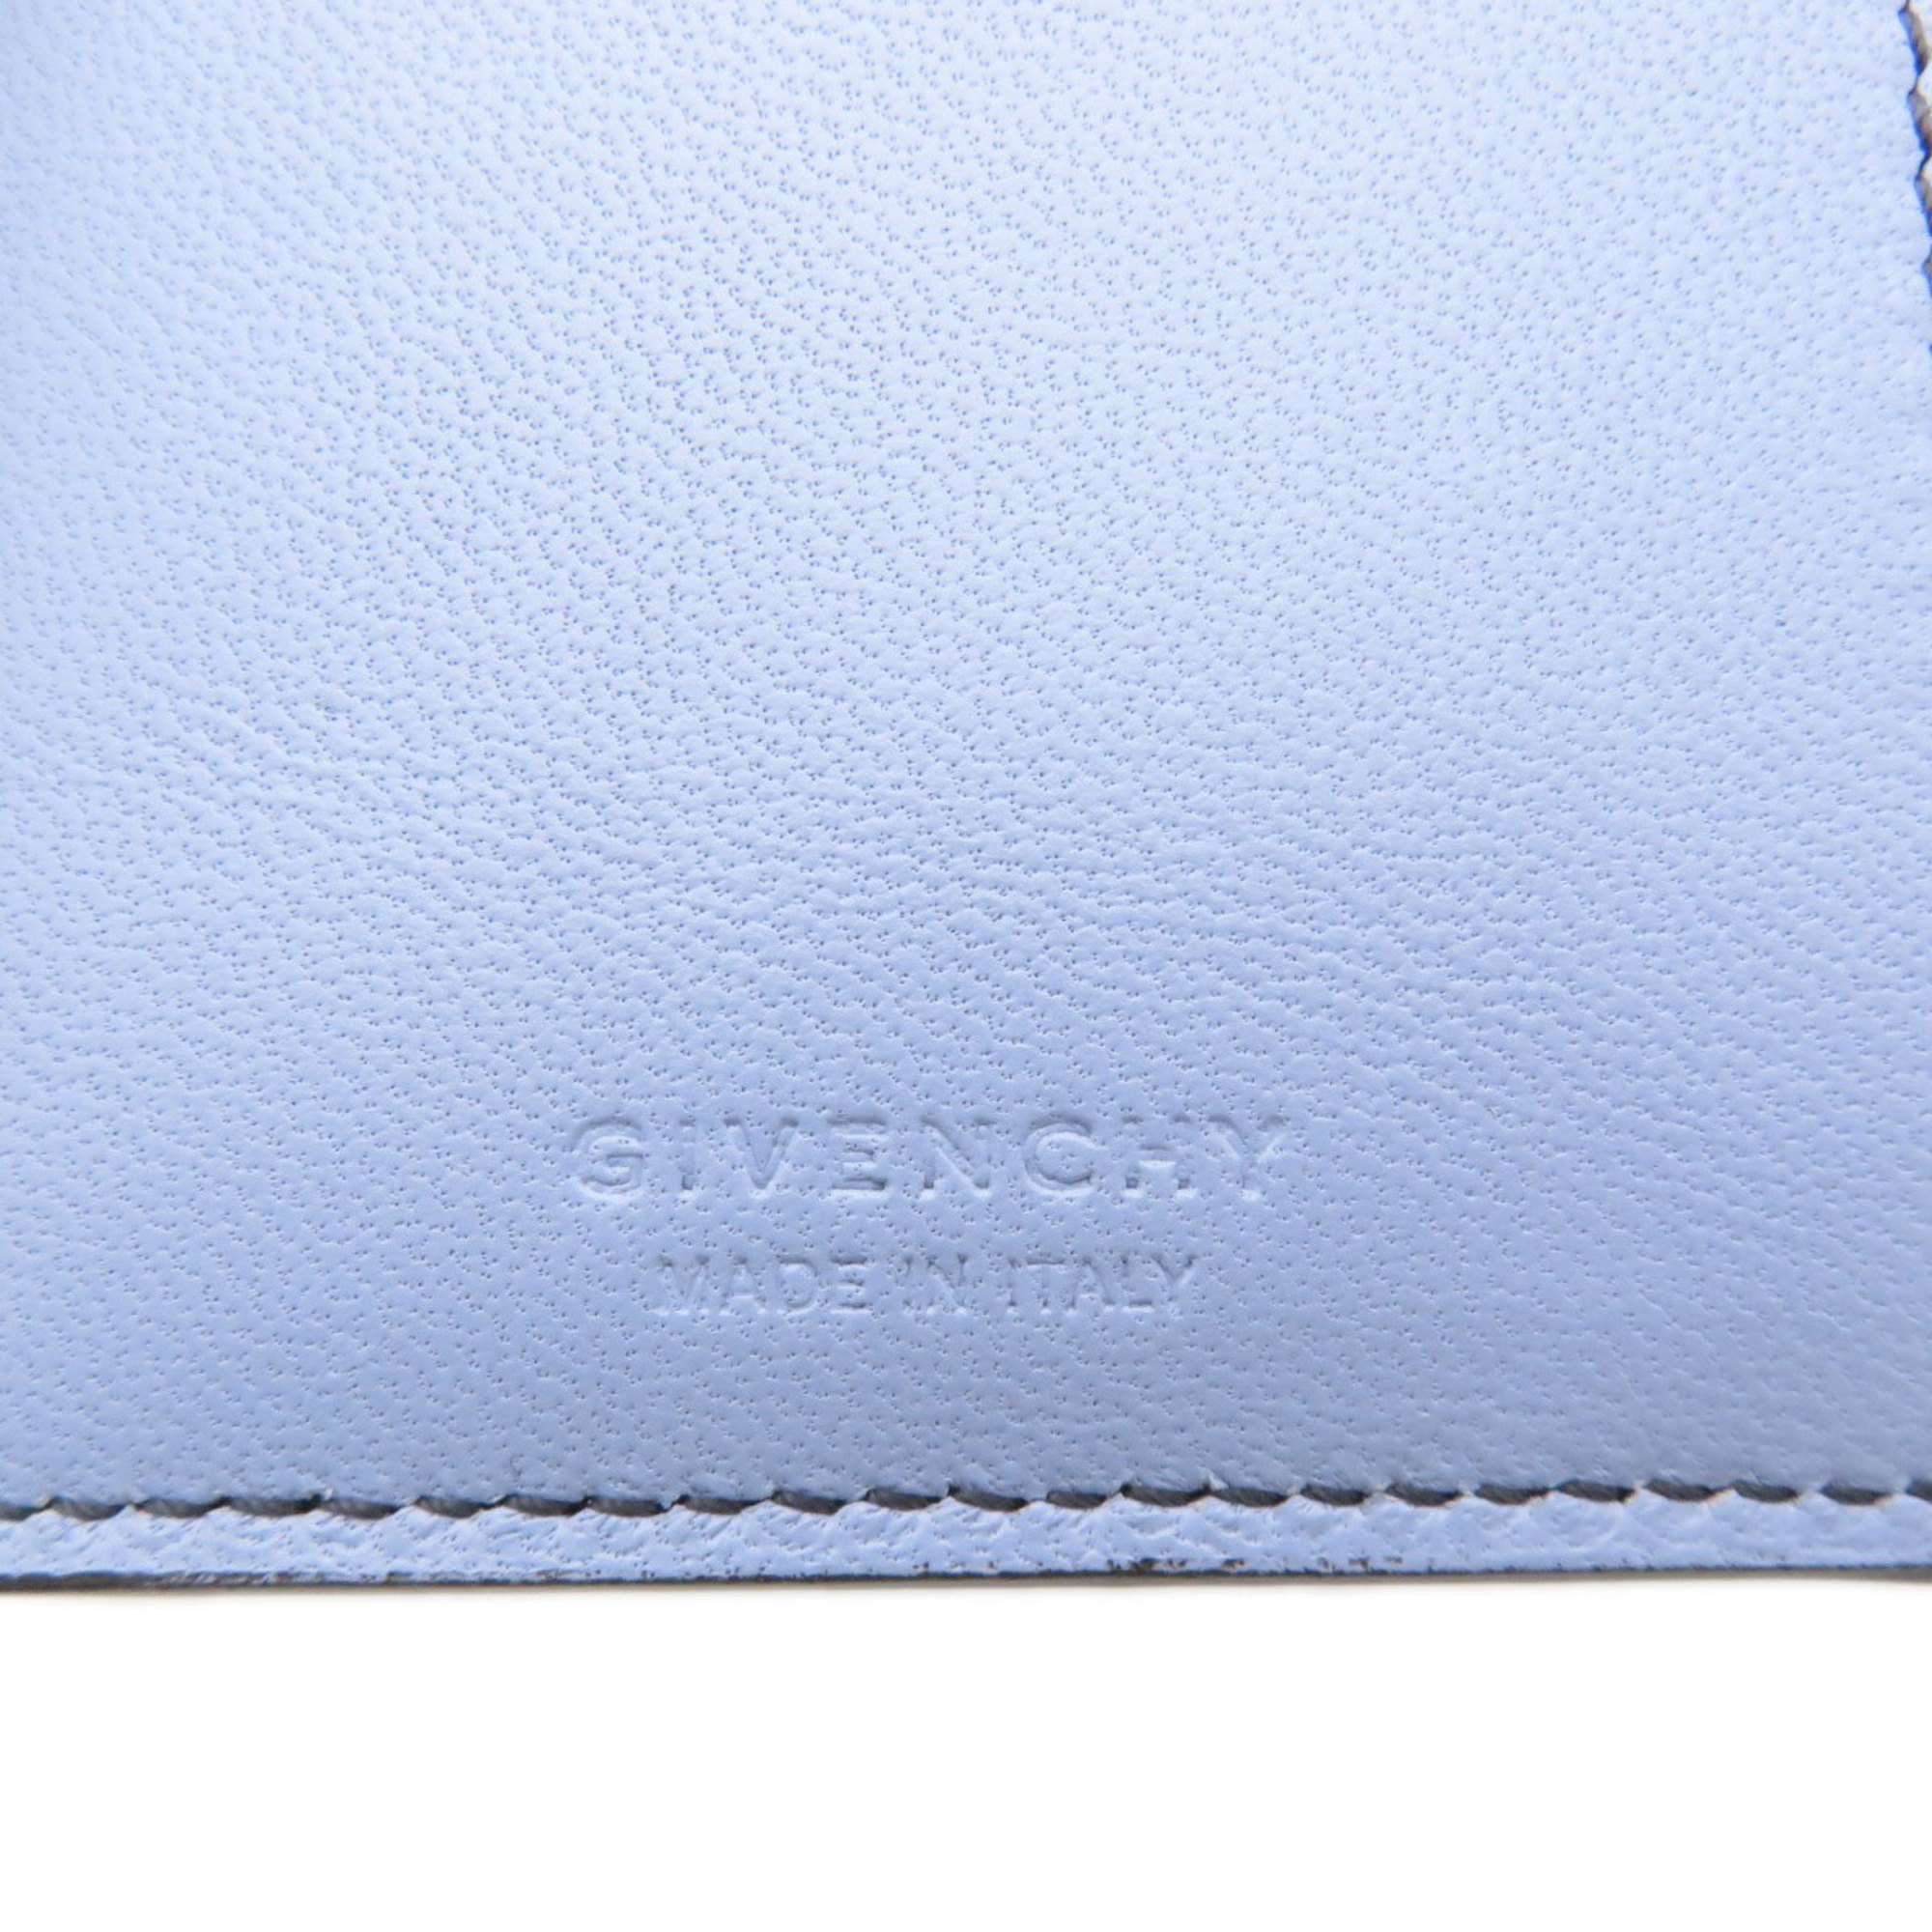 Givenchy motif business card holder/card case in calf leather for women